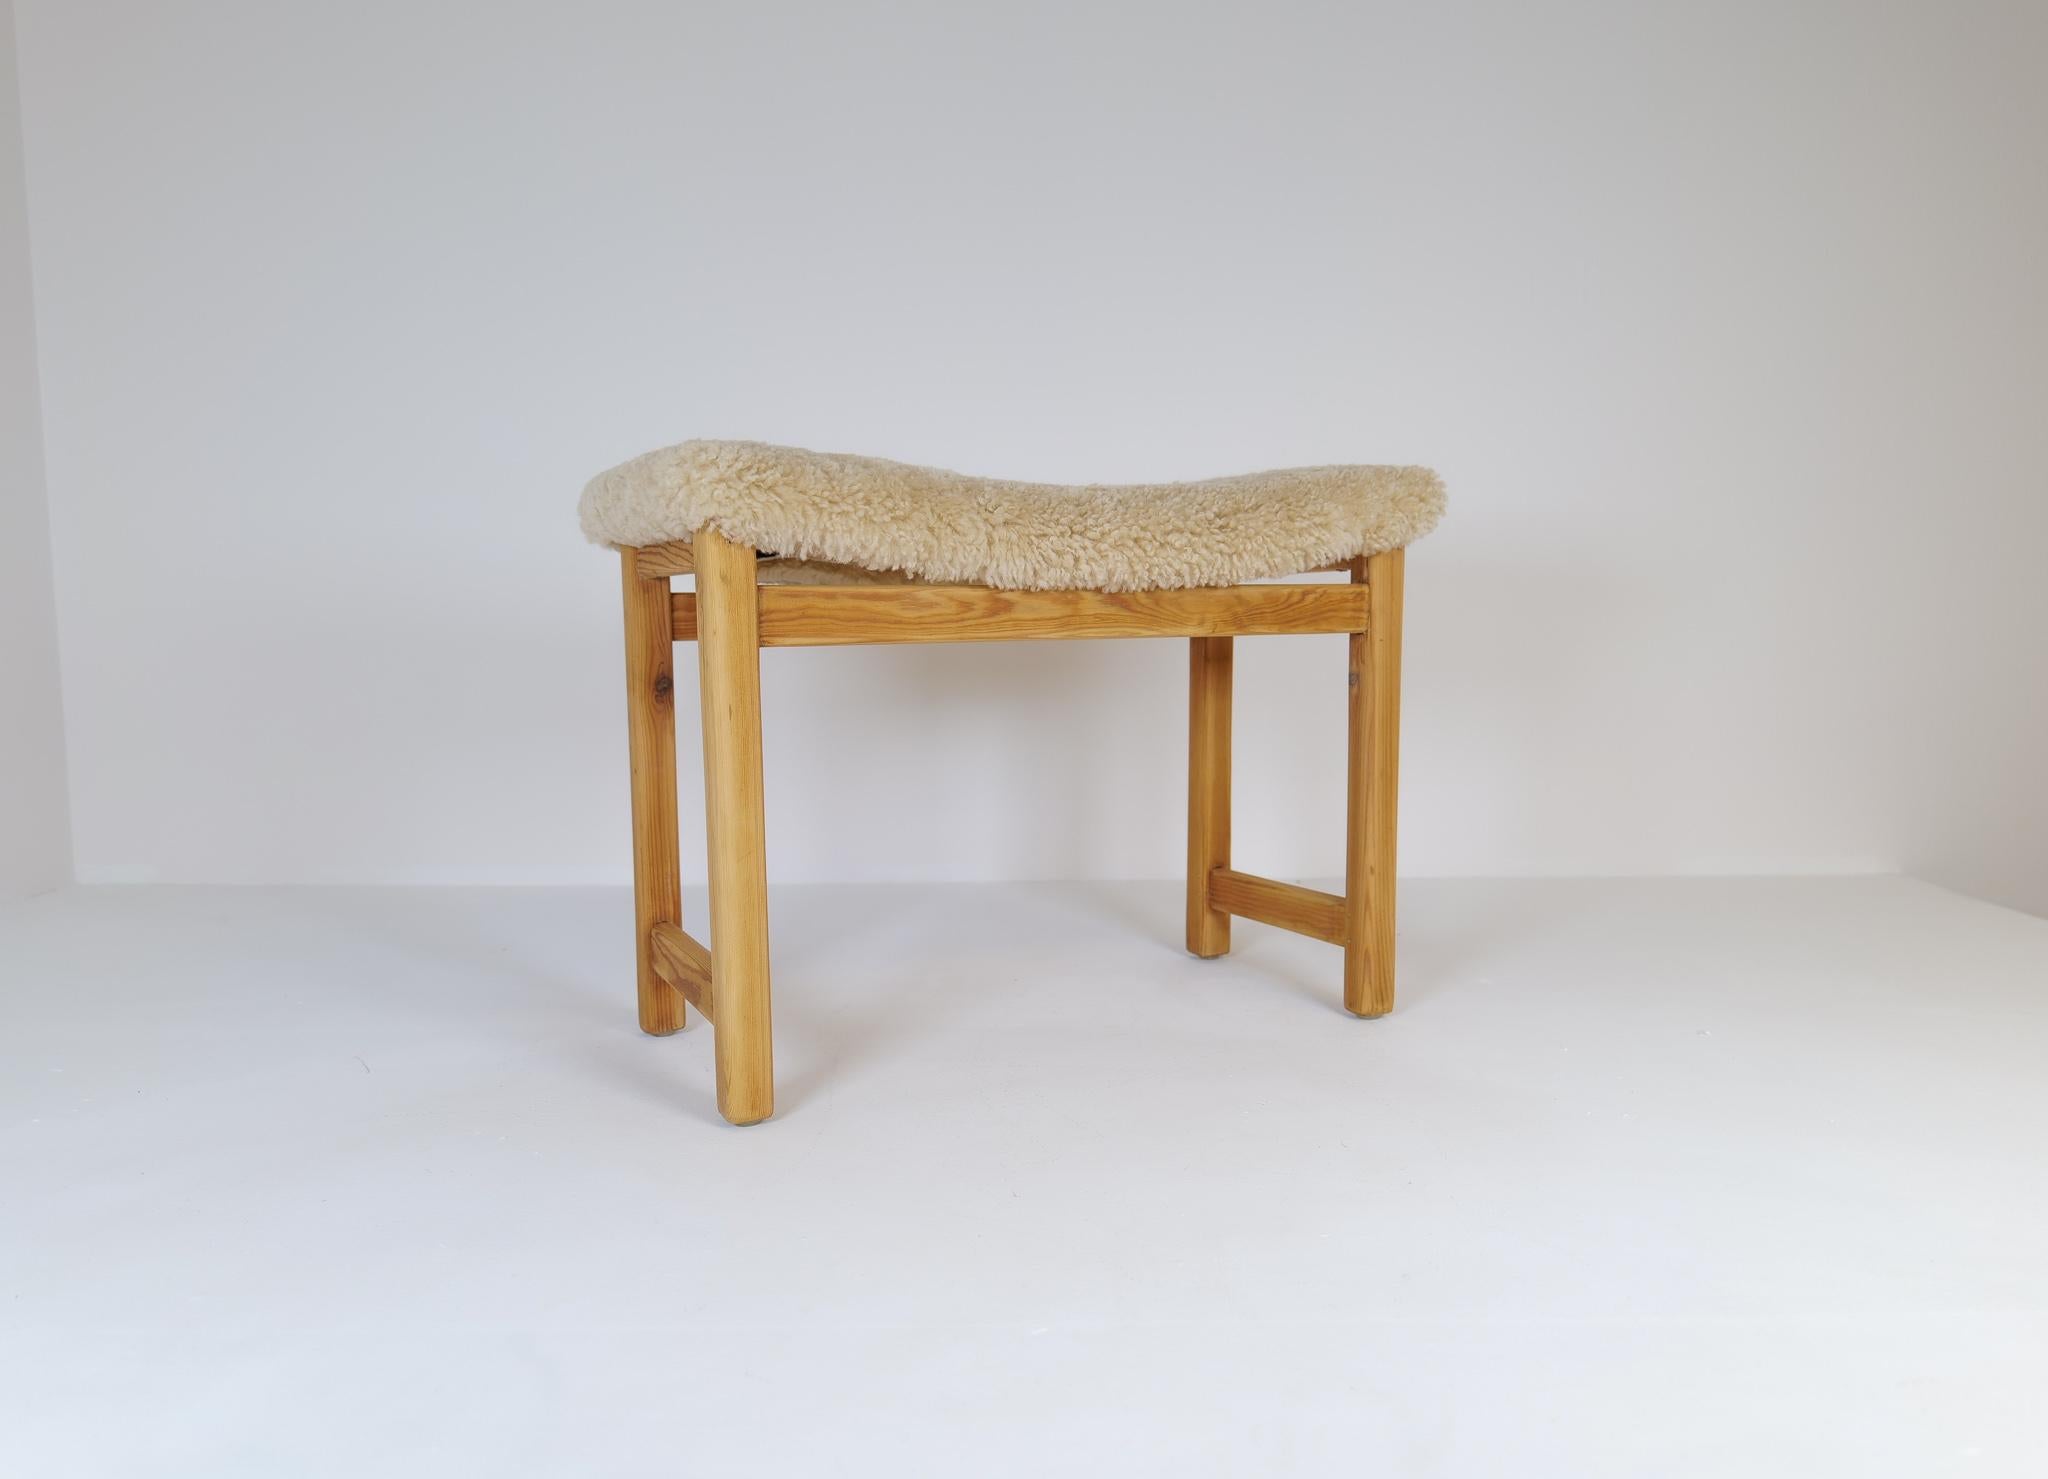 A stool made in Pine with newly upholstery in sheepskin. Natural and typical stool produced in Sweden during the 1960-1970s
This stool is a good example of the good craftsmanship and minimalistic stile to come in Scandinavian furniture. 

Good